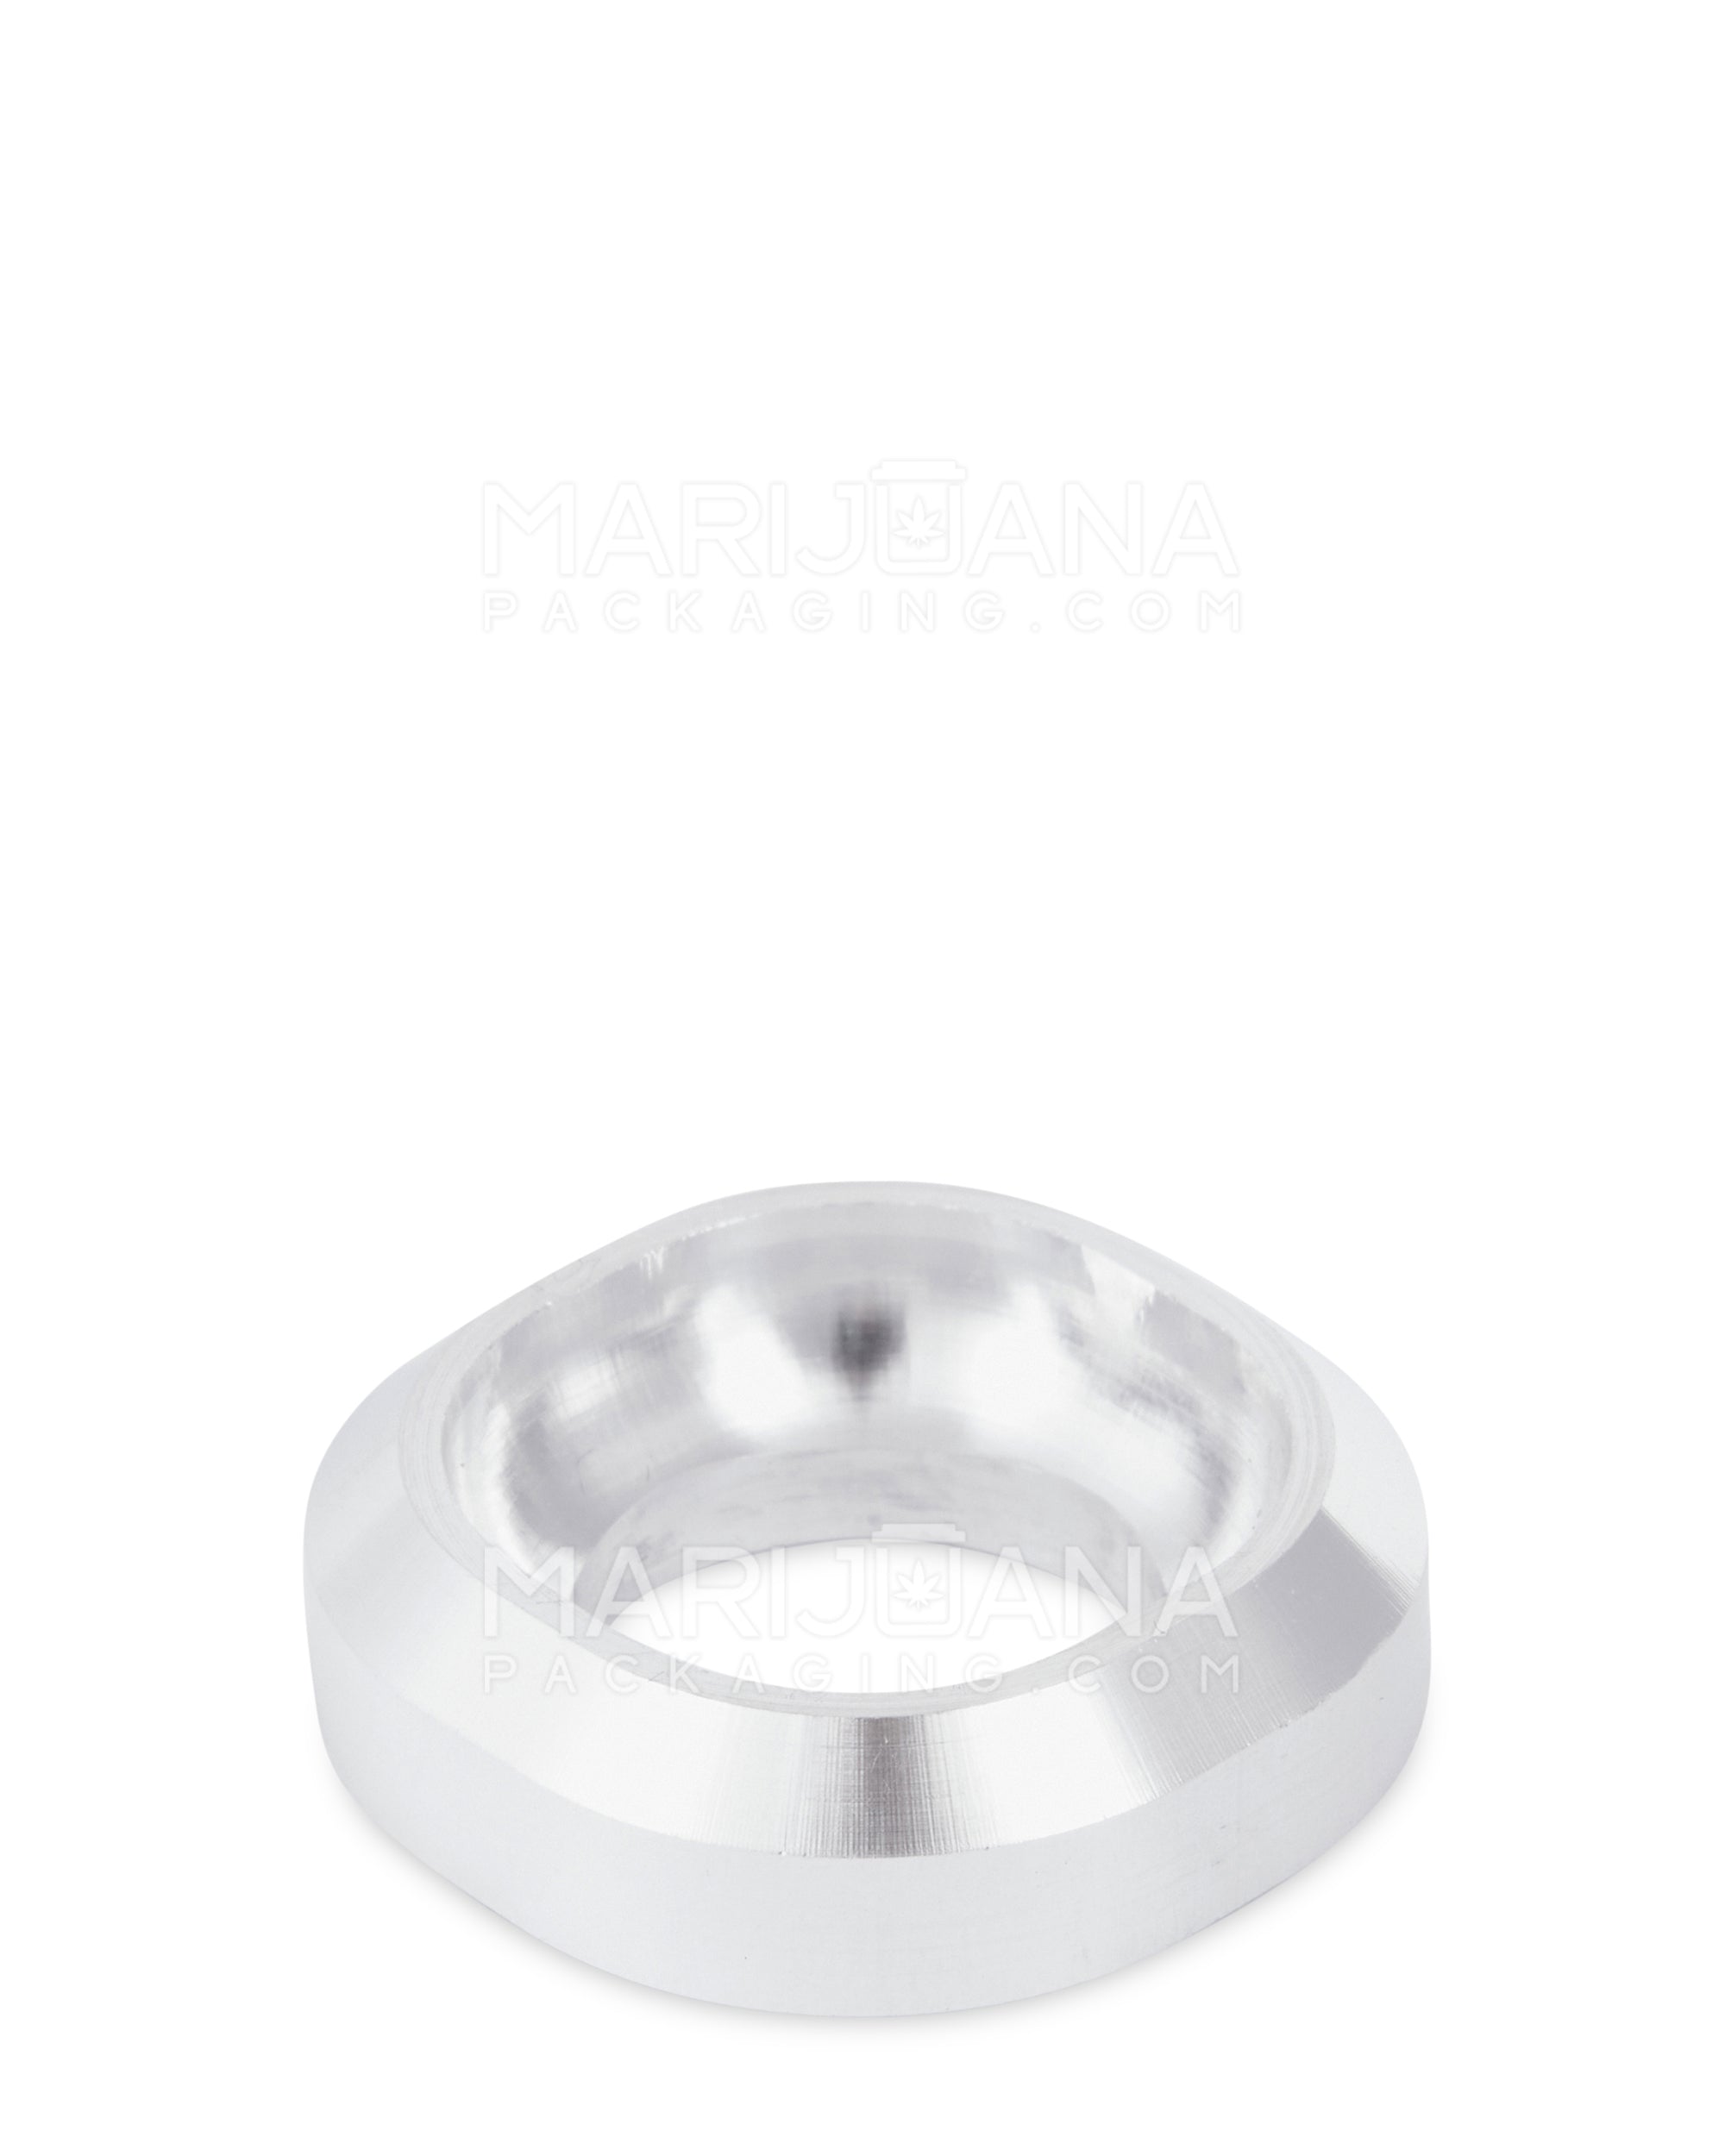 GENIUS PIPE | 4x Size Party Bowl | 29mm x 29mm - Metal - 1